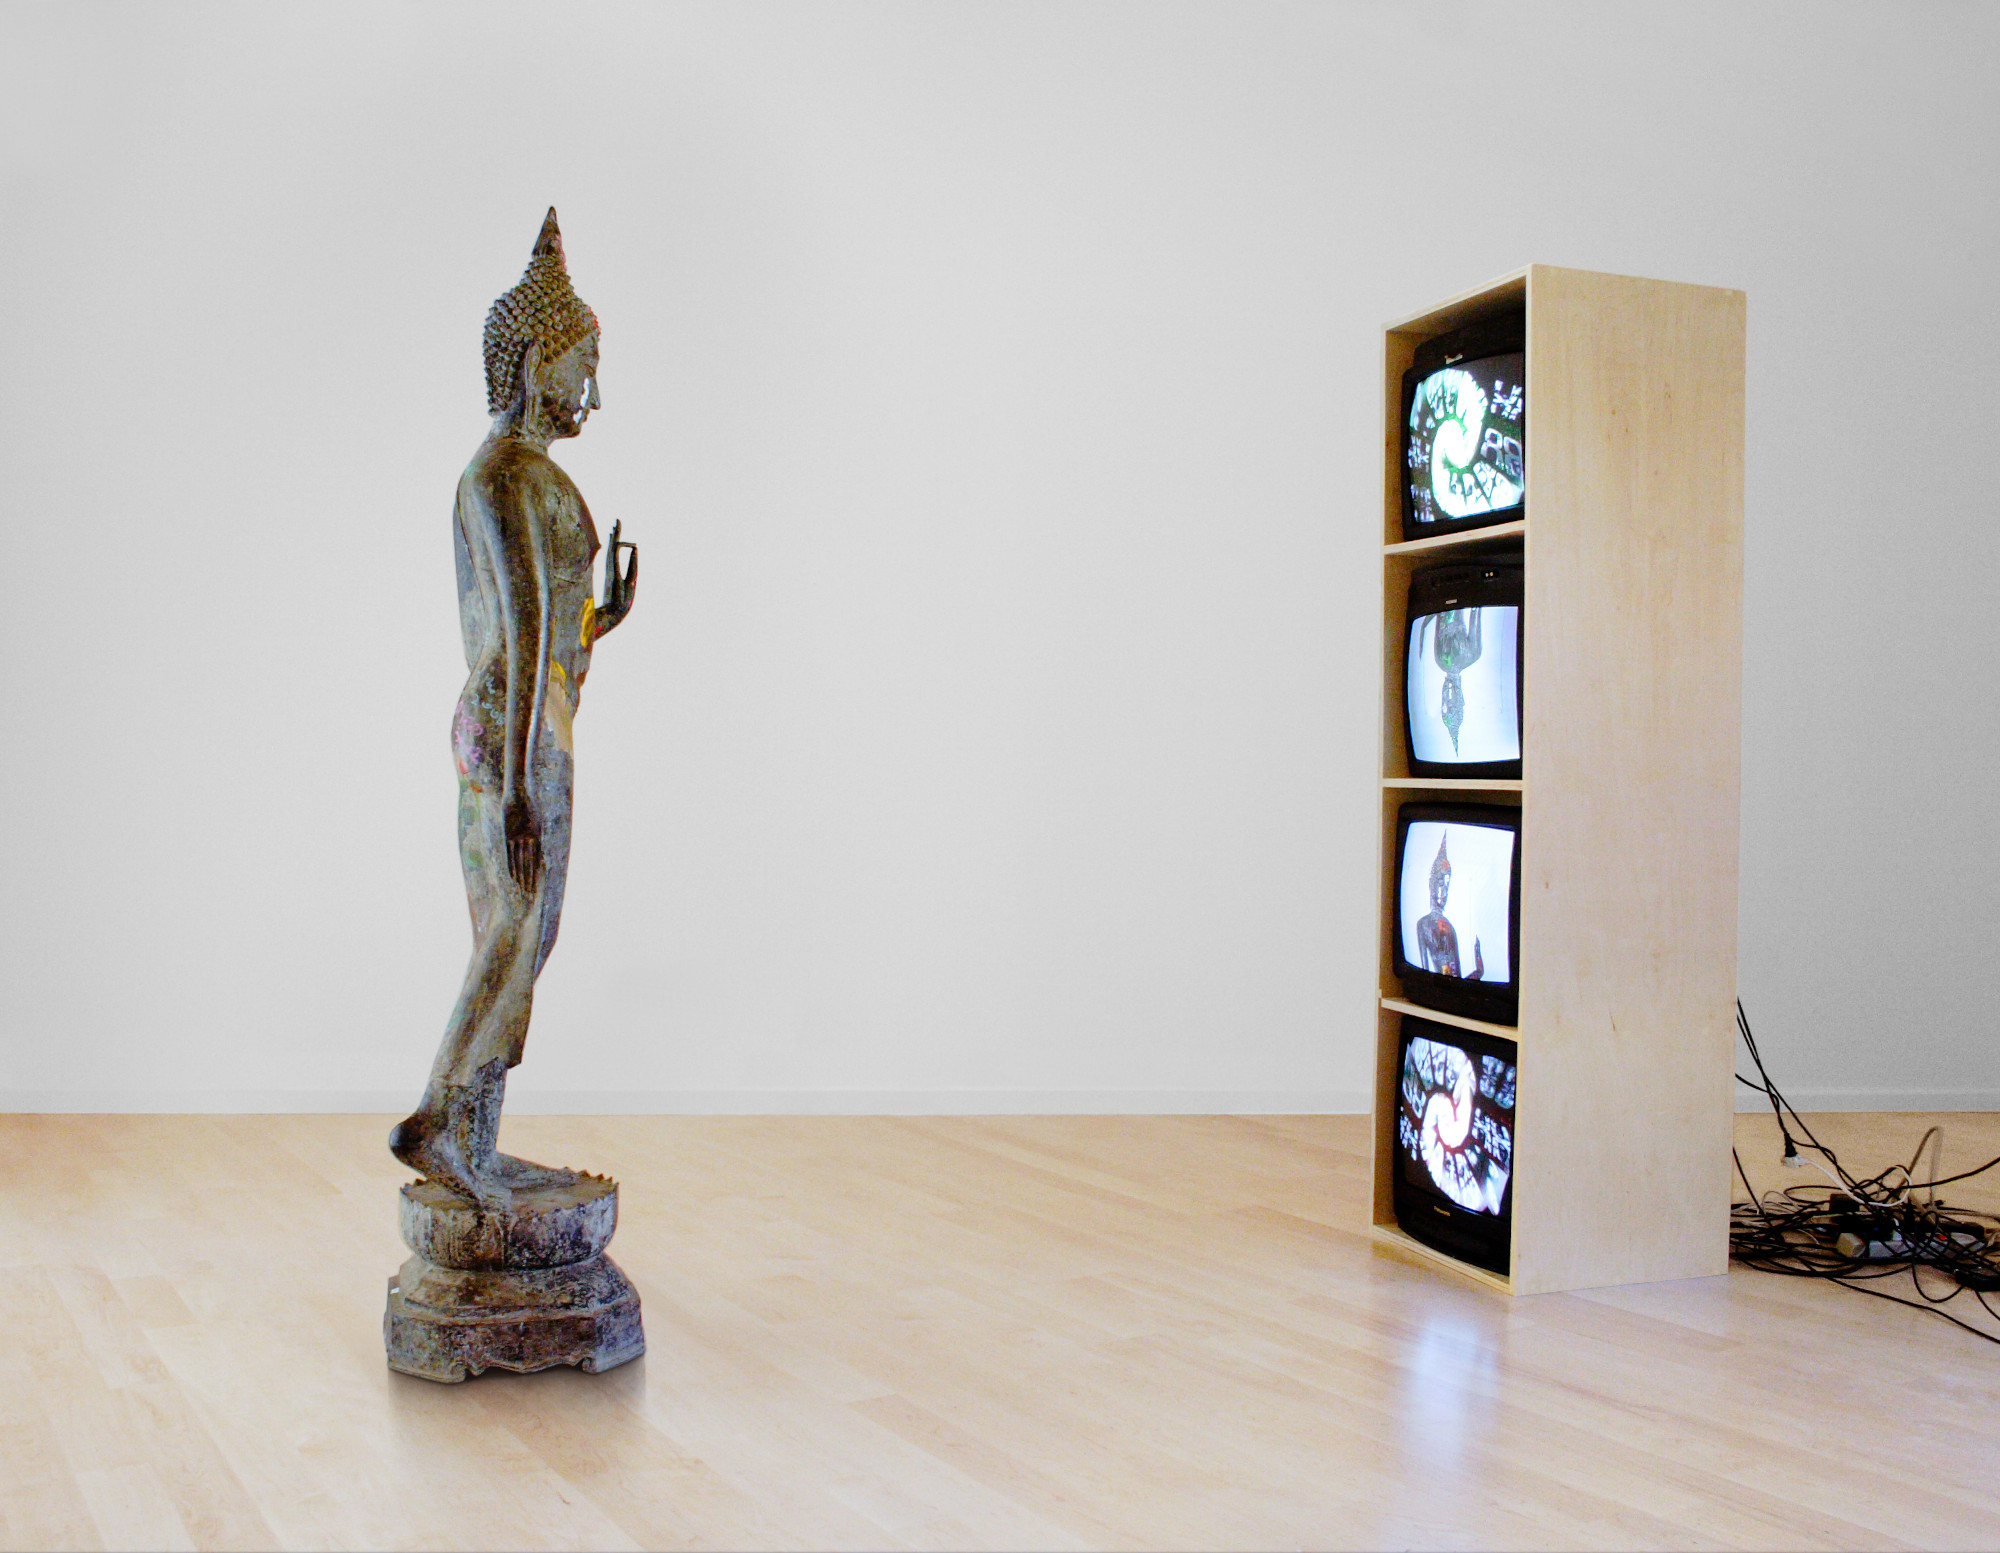 Nam June Paik
Standing Buddha with Outstretched Hand, 2005
Two-channel video (color, silent), 4 19-inch color monitors, wood shelf, electrical cables, closed-circuit video camera, tripod, and permanent oil marker and acrylic on bronze Buddha
Overall Dimensions Variable
© Nam June Paik Estate
Courtesy Gagosian